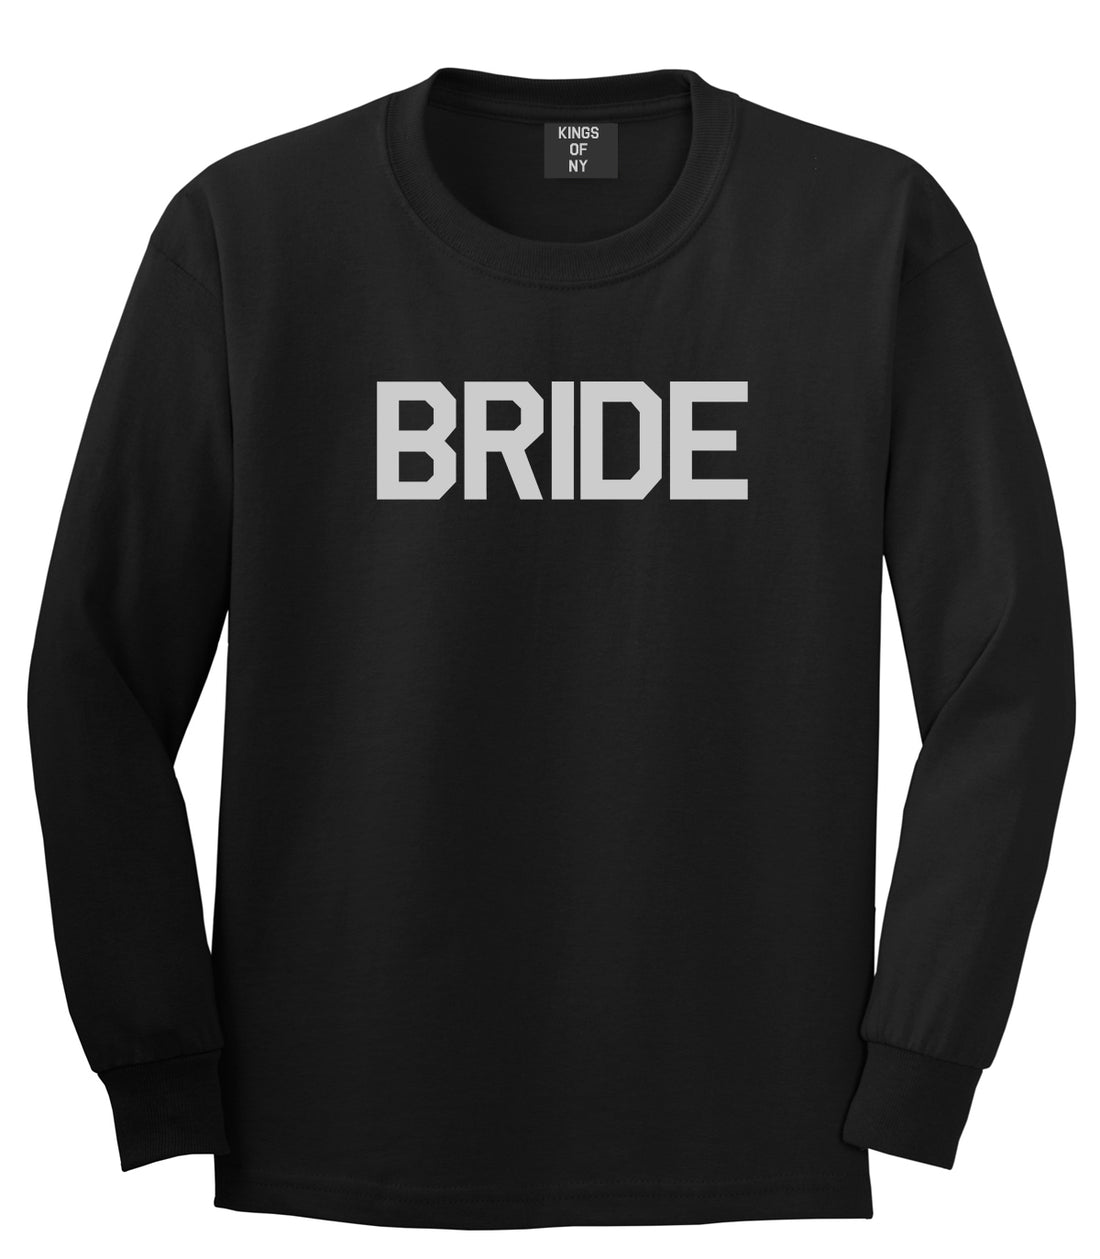 Bride Bachlorette Party Black Long Sleeve T-Shirt by Kings Of NY